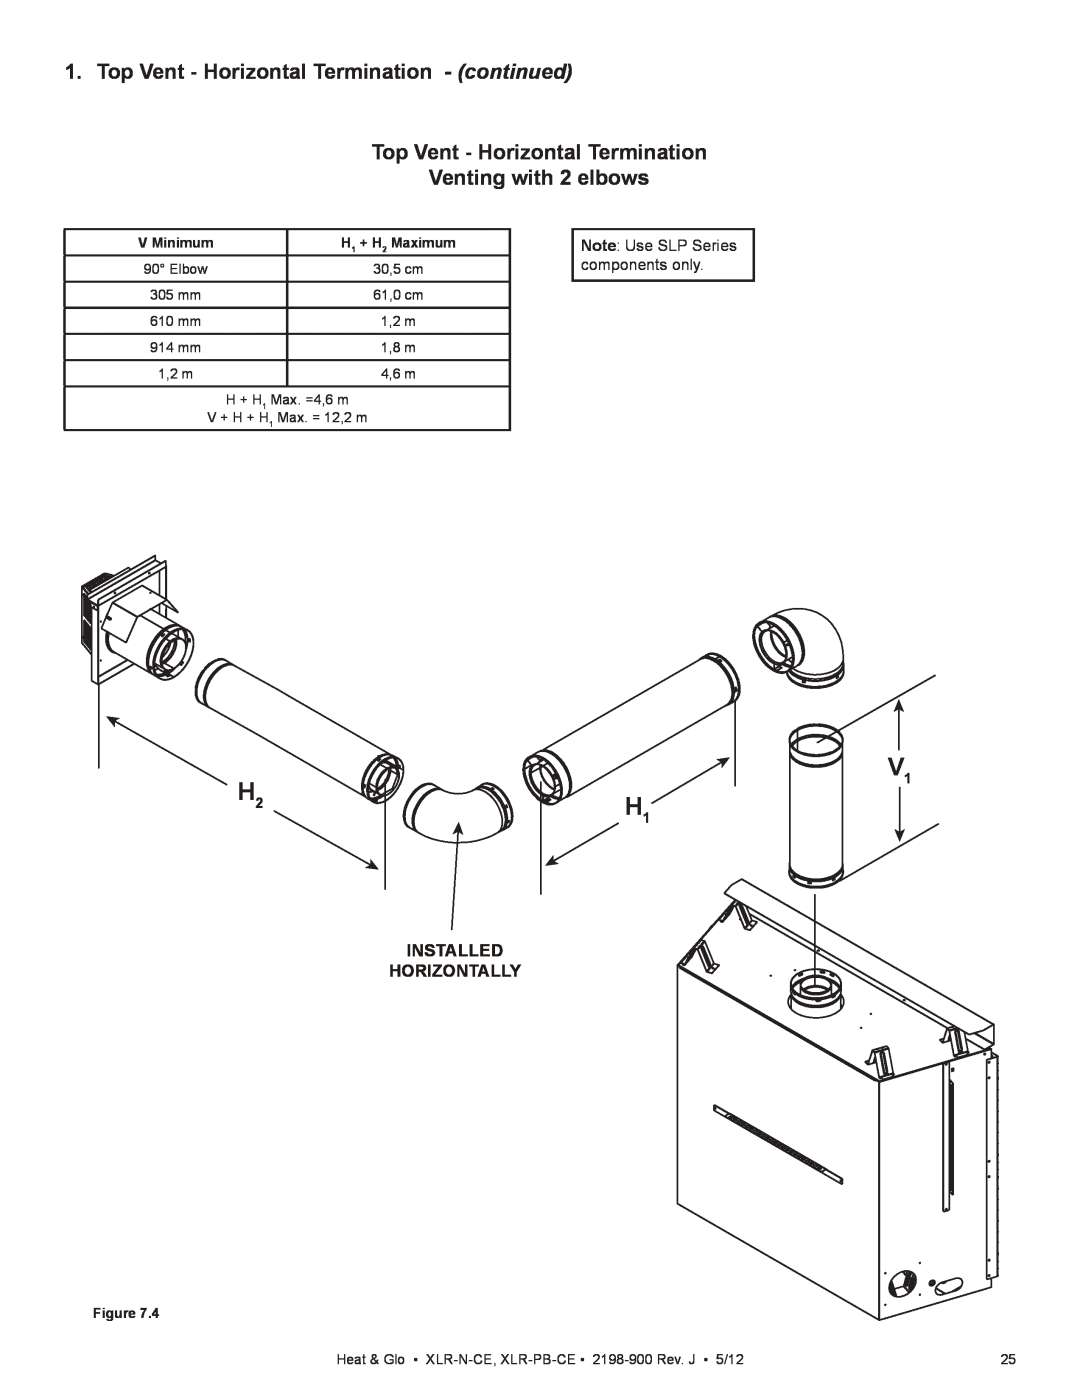 Heat & Glo LifeStyle XLR-PB-CE Top Vent - Horizontal Termination - continued, Venting with 2 elbows, V Minimum, Figure 